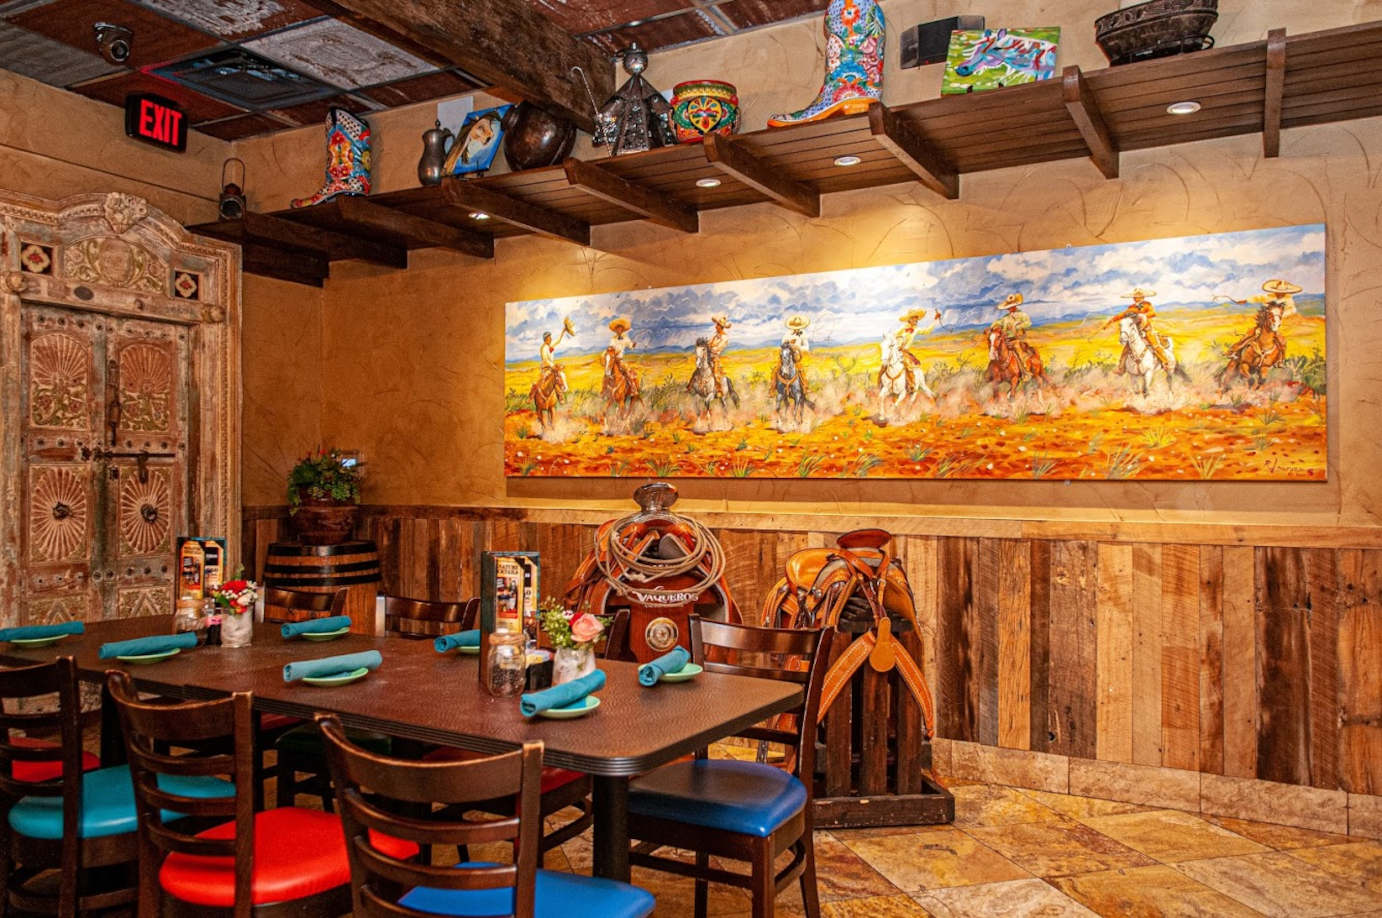 Restaurant interior, wall decorations in the back